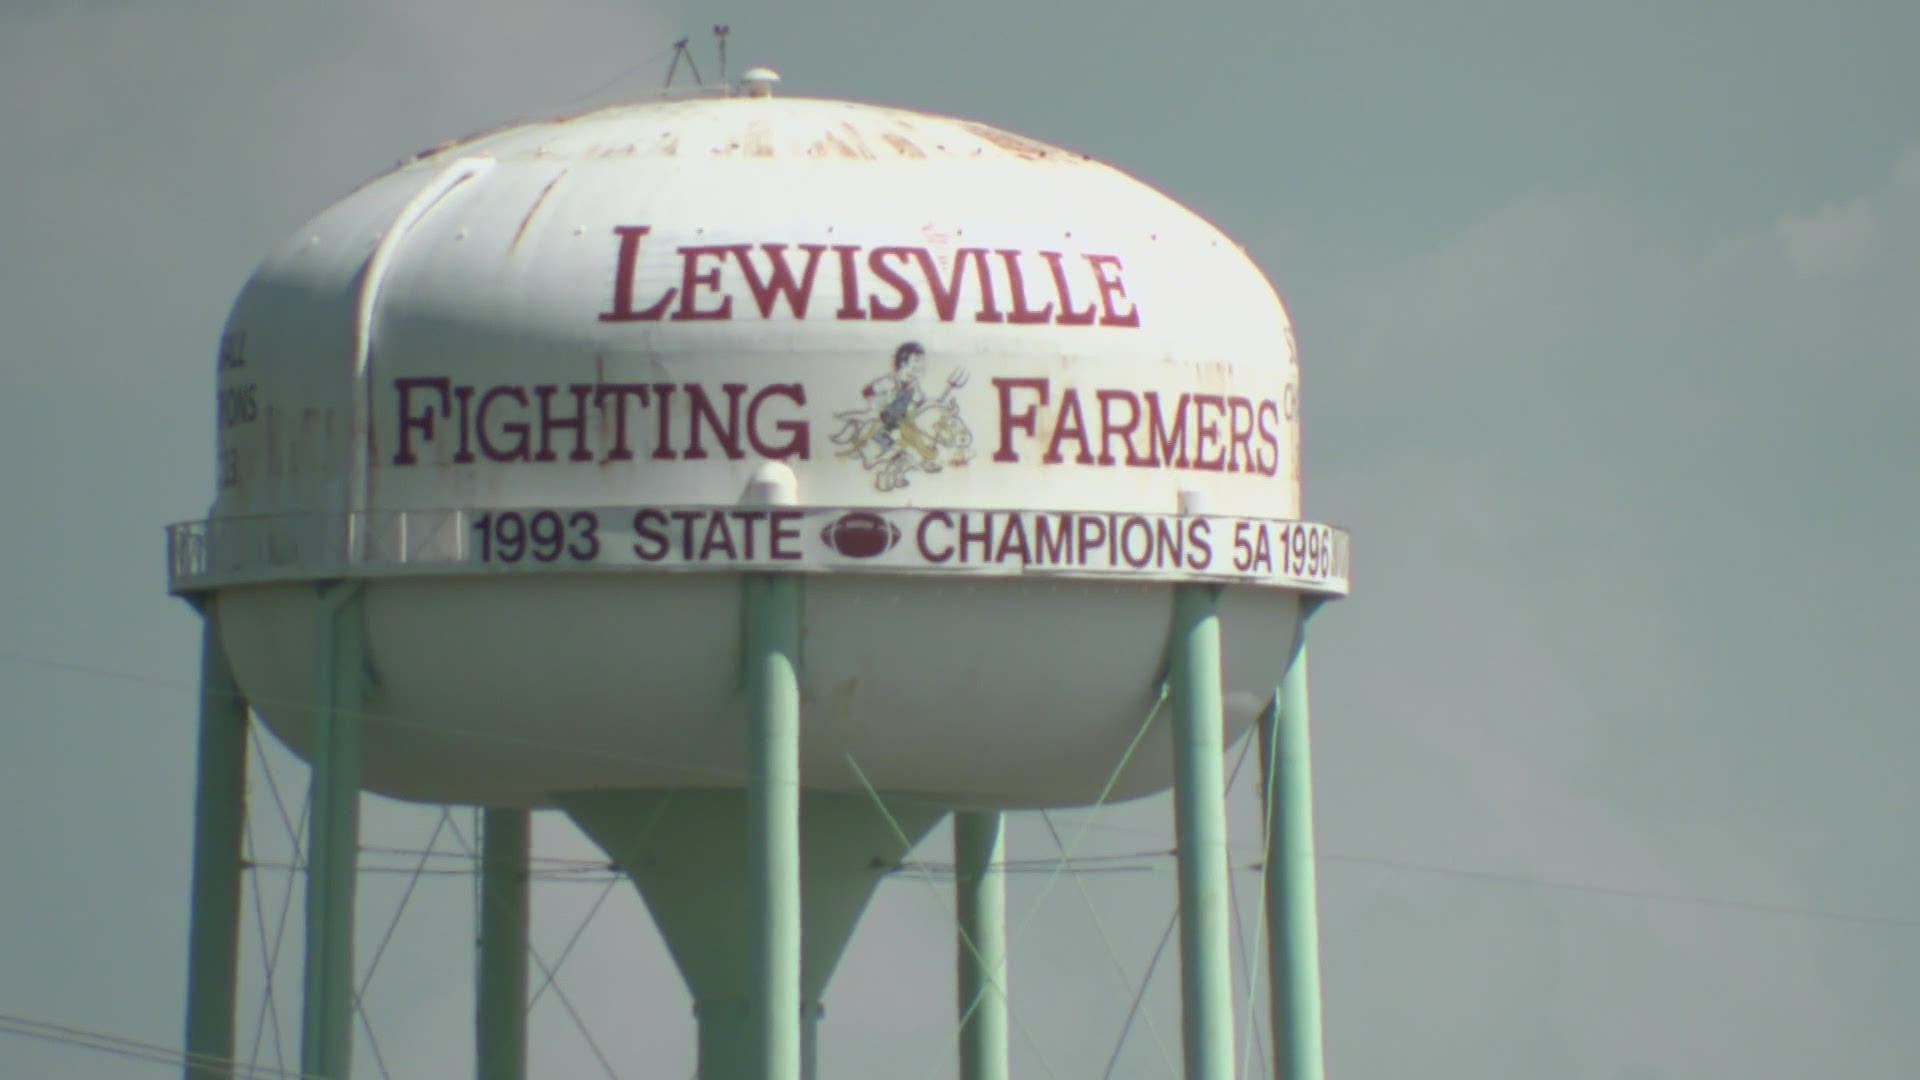 "A lot of people know Lewisville because of the water tower," said historian Gary Kerbow.